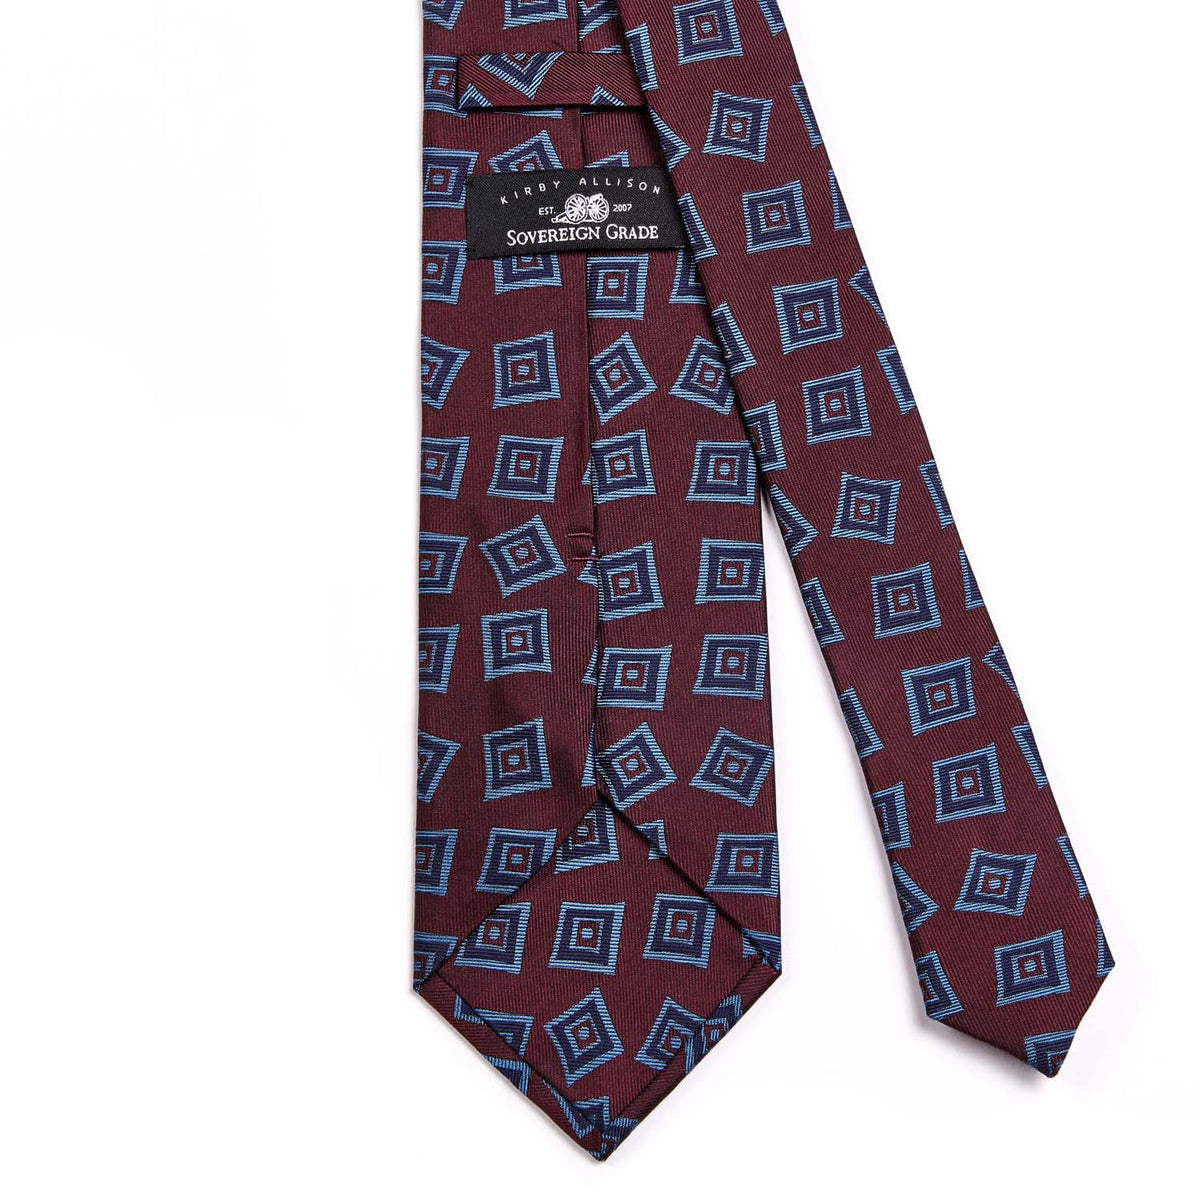 A Sovereign Grade Oxblood Art Deco Jacquard Tie, 150 cm from KirbyAllison.com with blue and red designs showcasing quality craftsmanship.